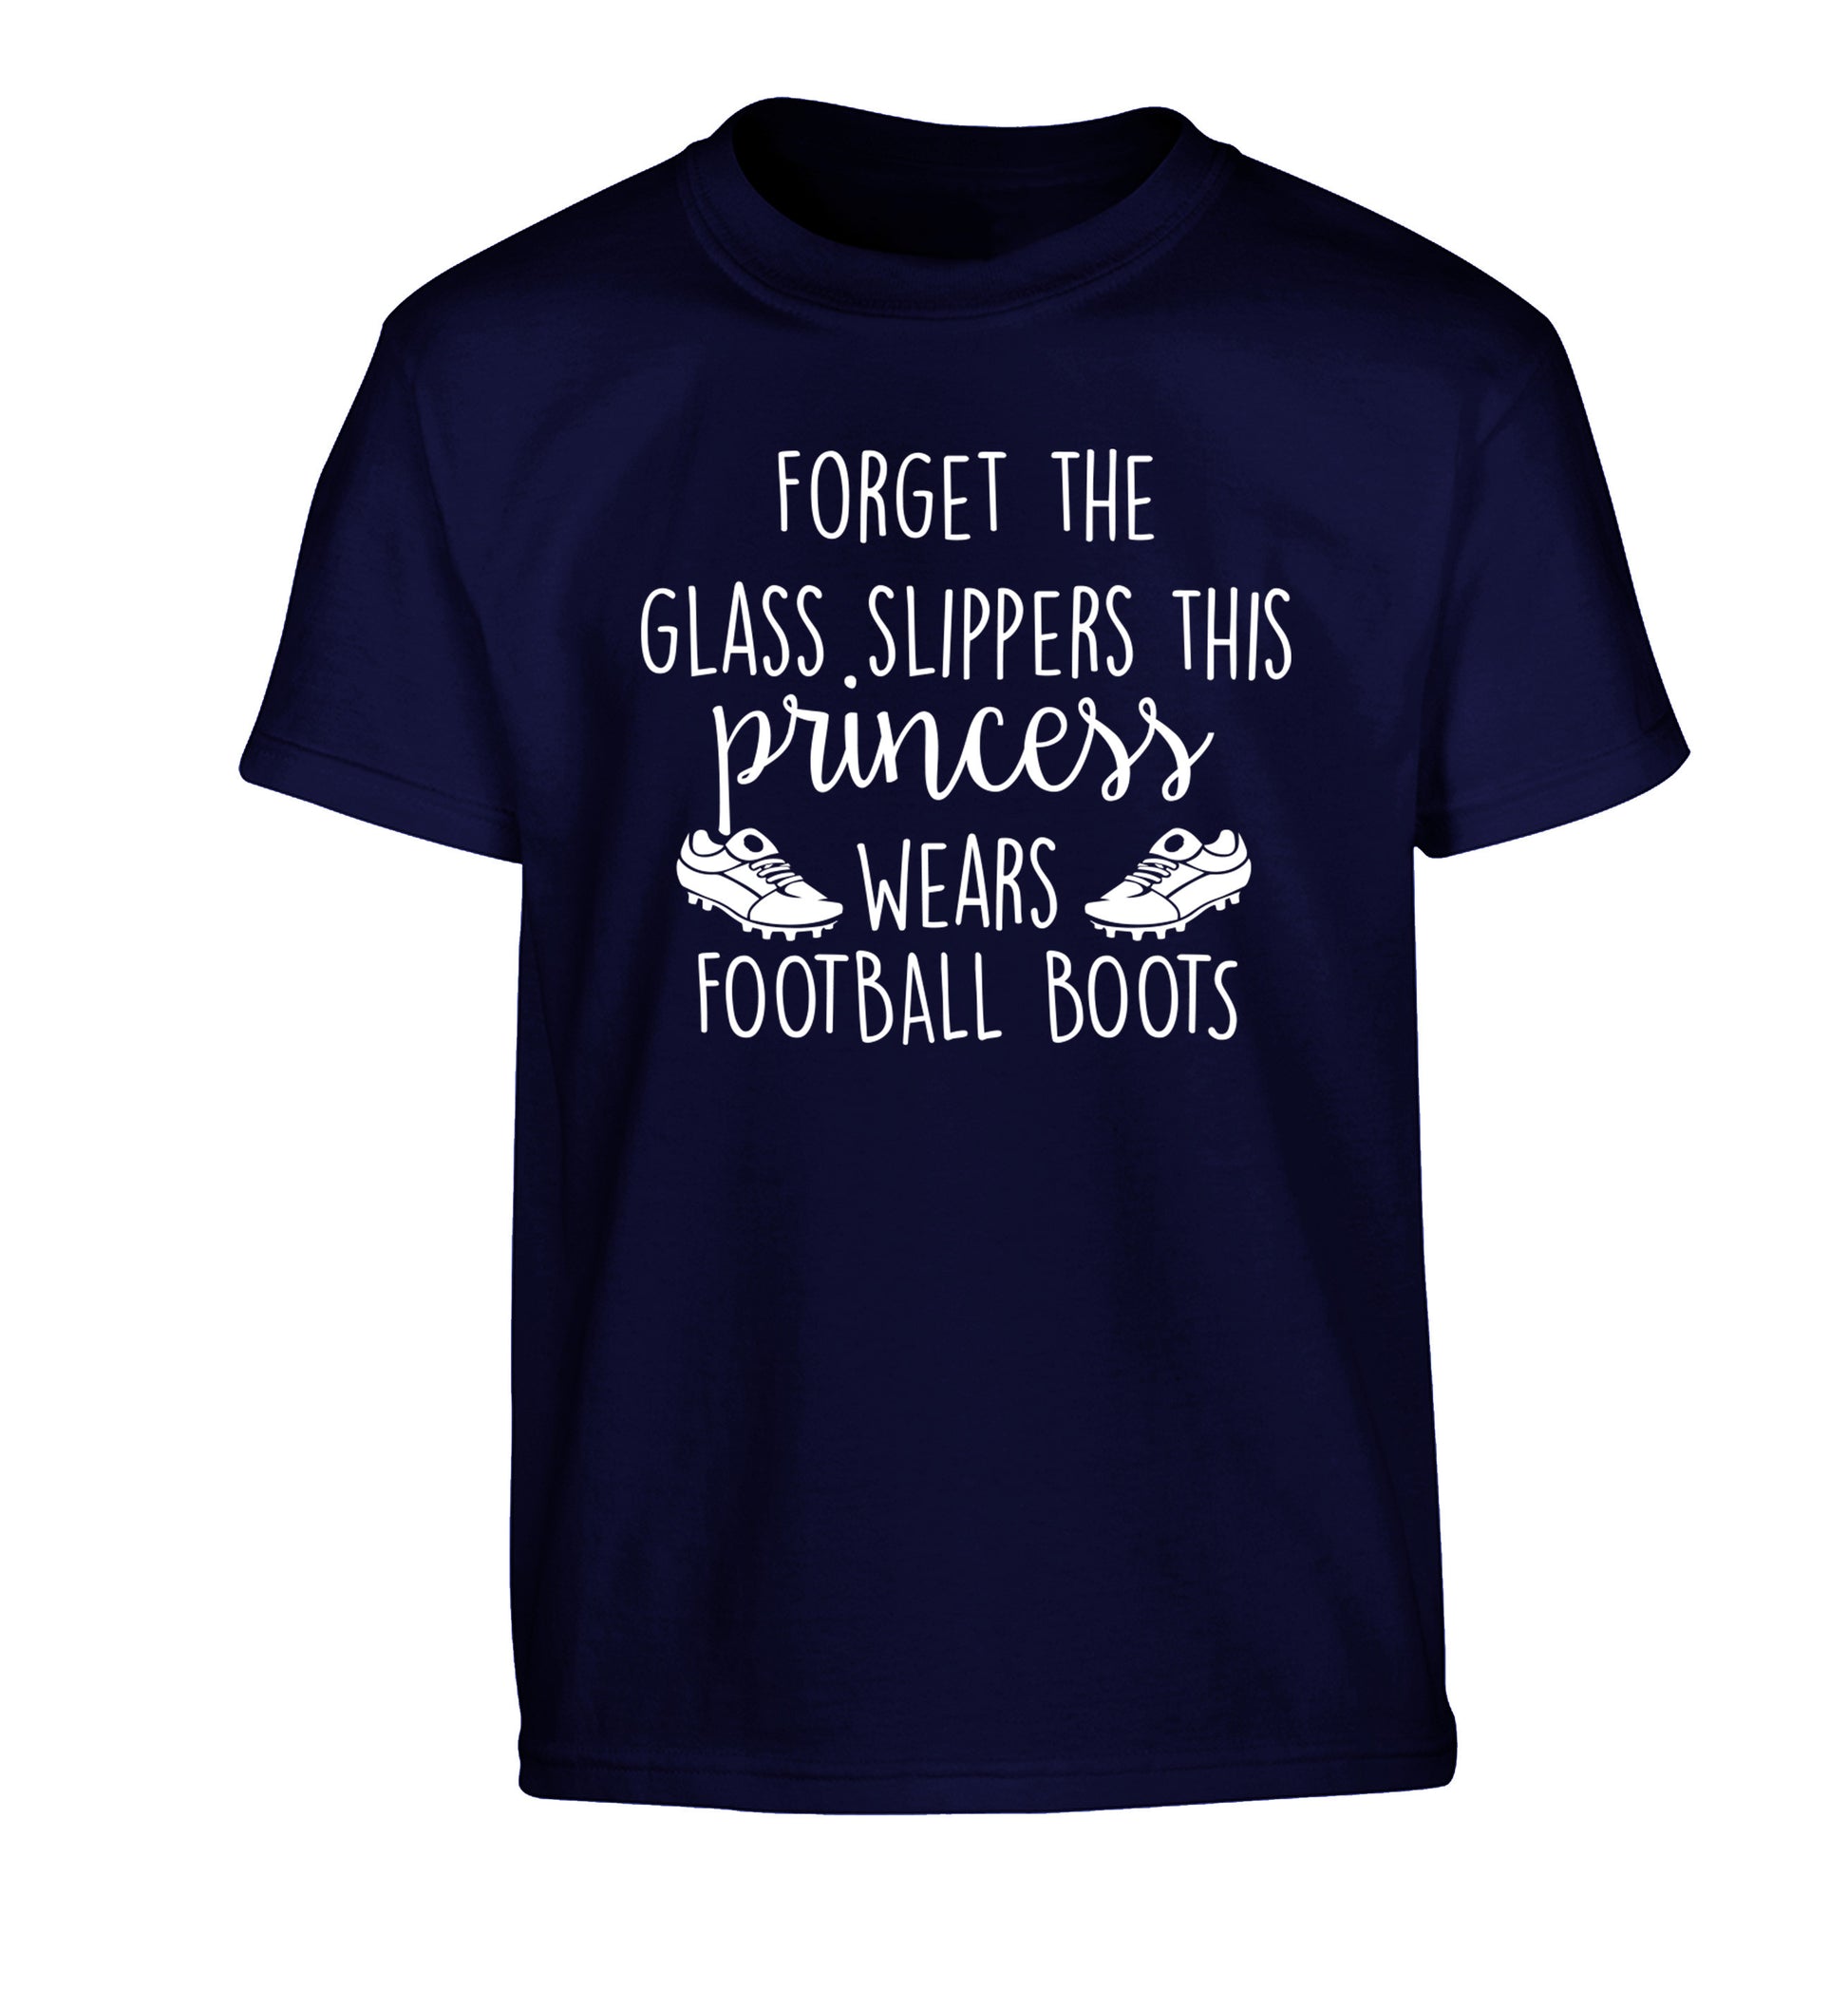 Forget the glass slippers this princess wears football boots Children's navy Tshirt 12-14 Years